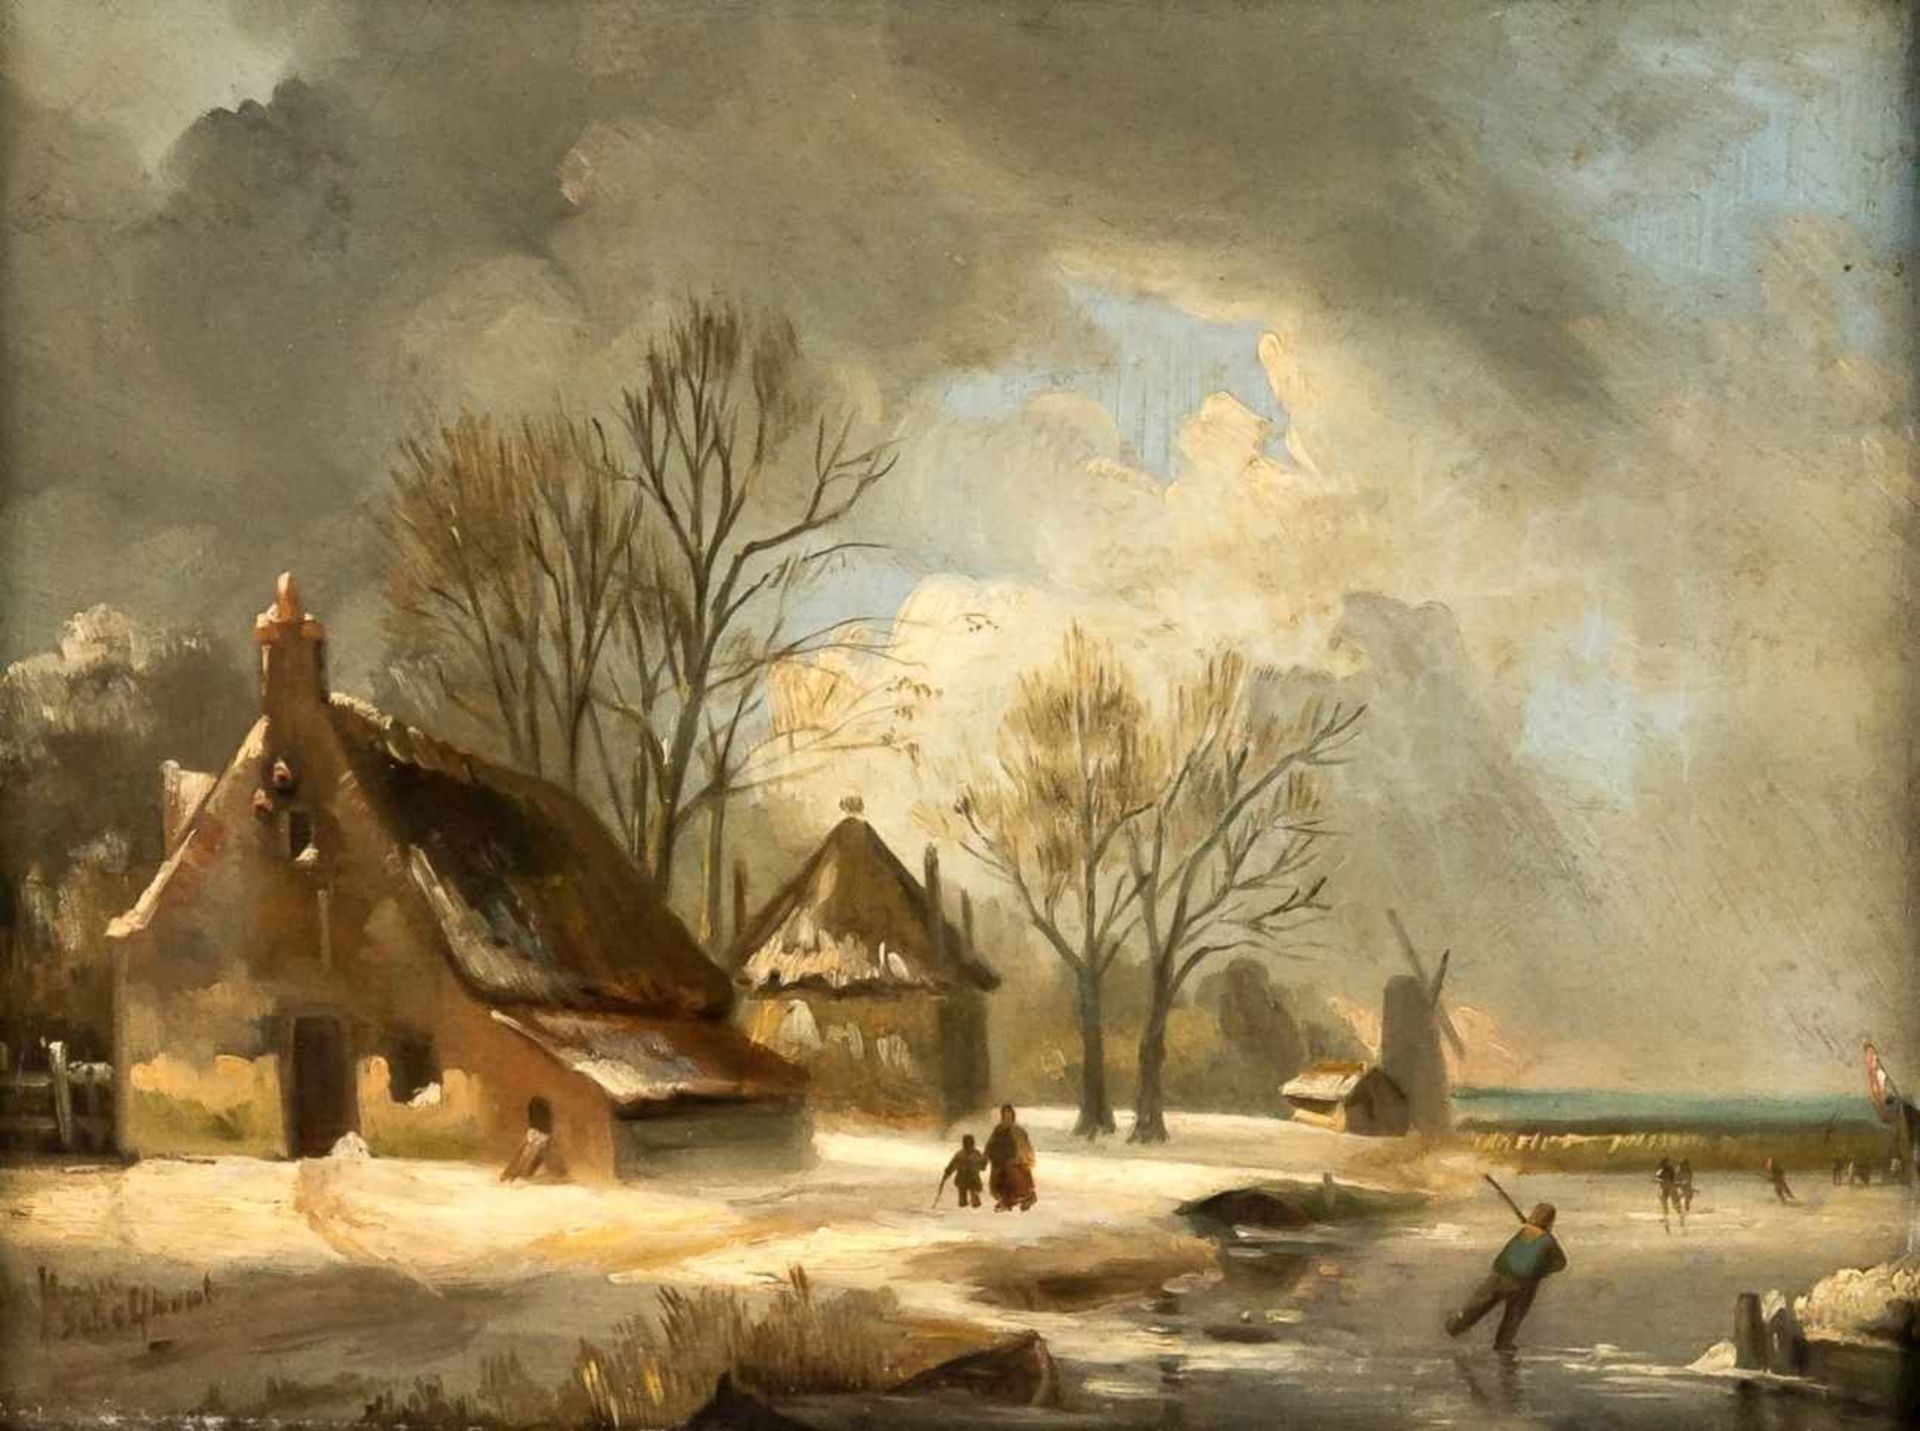 A Winter Landscape, Netherlands, oil on canvas, signed A. Schelfhout, probably AndreasSchelfhout (